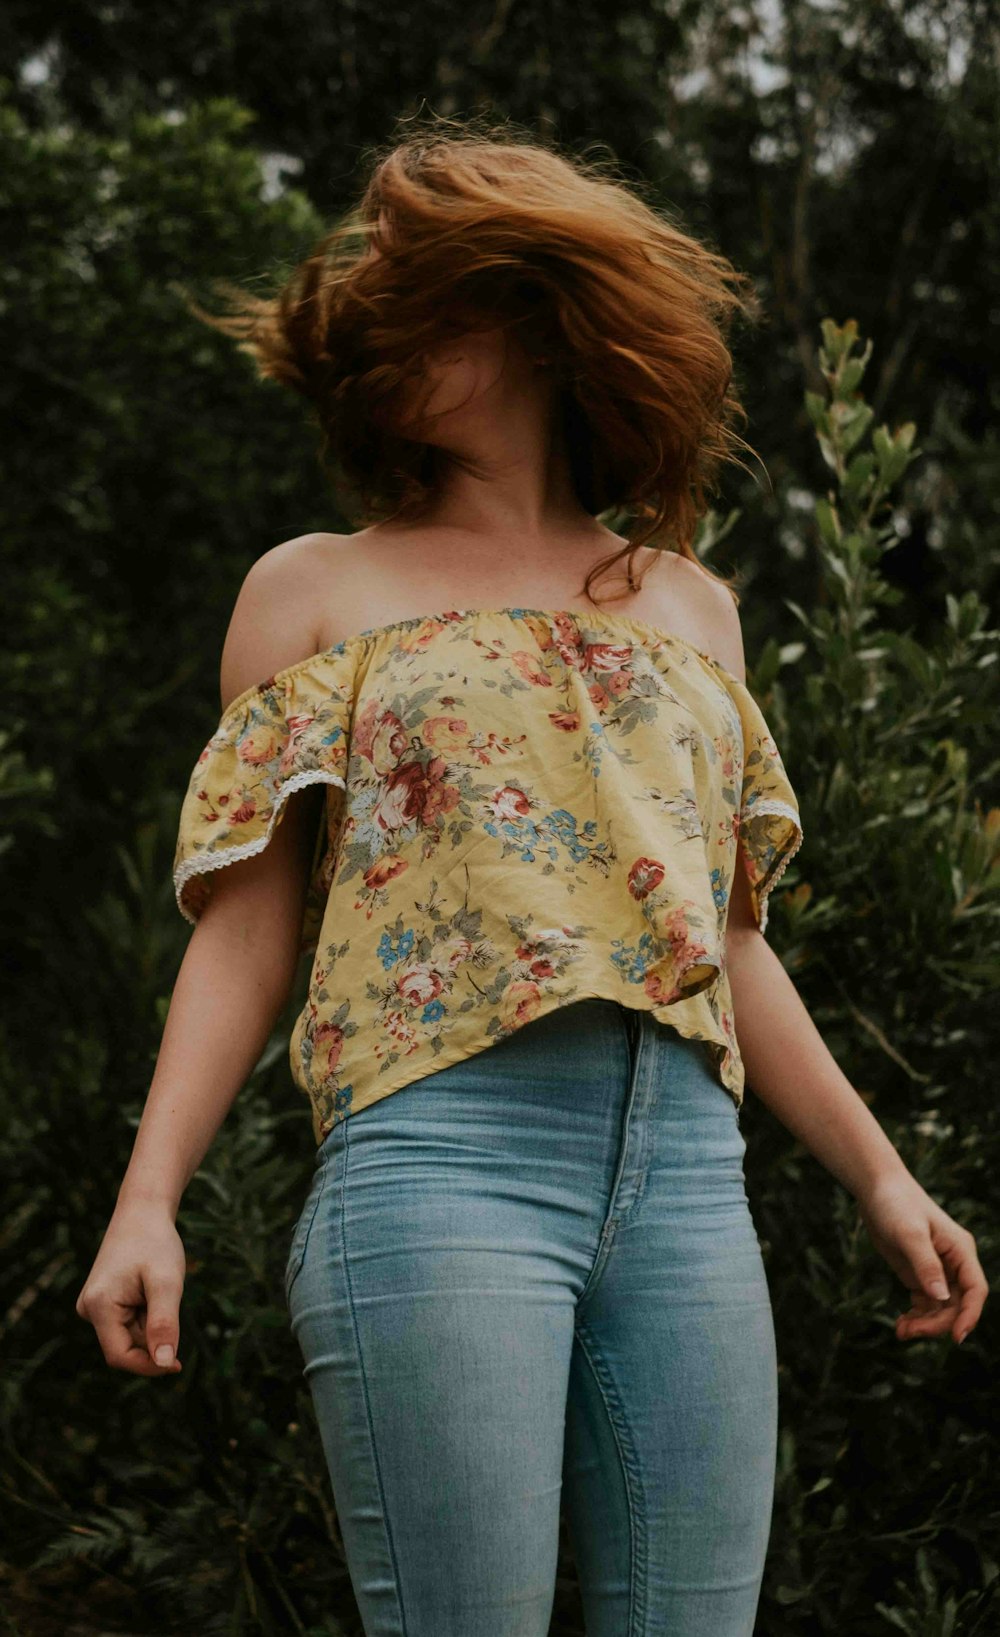 woman wearing blue jeans standing behind plants